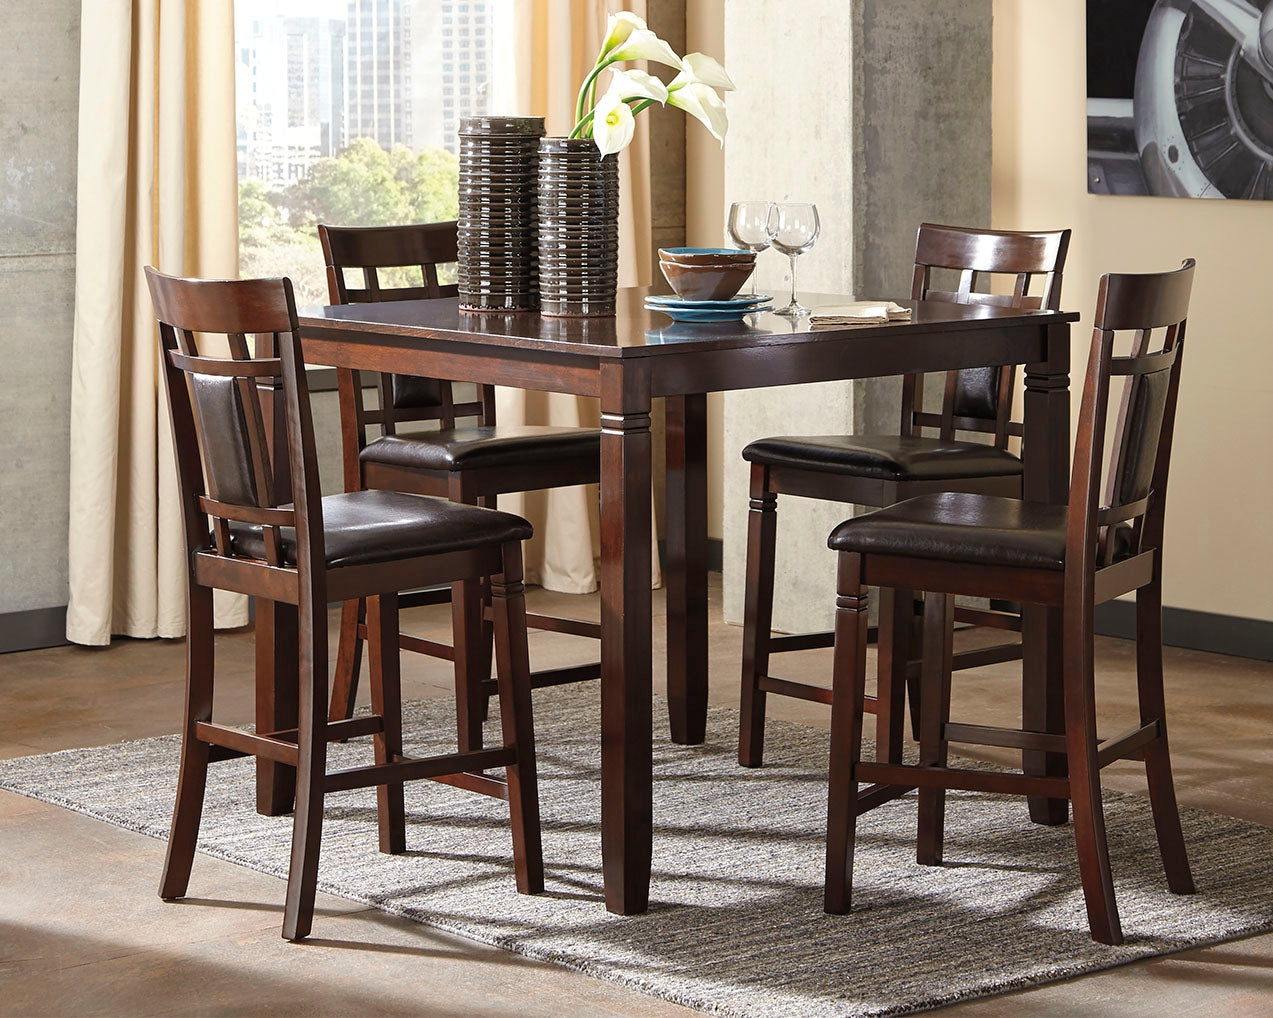 Bennox Brown Counter Height Dining Table And Bar Stools (Set Of 5)